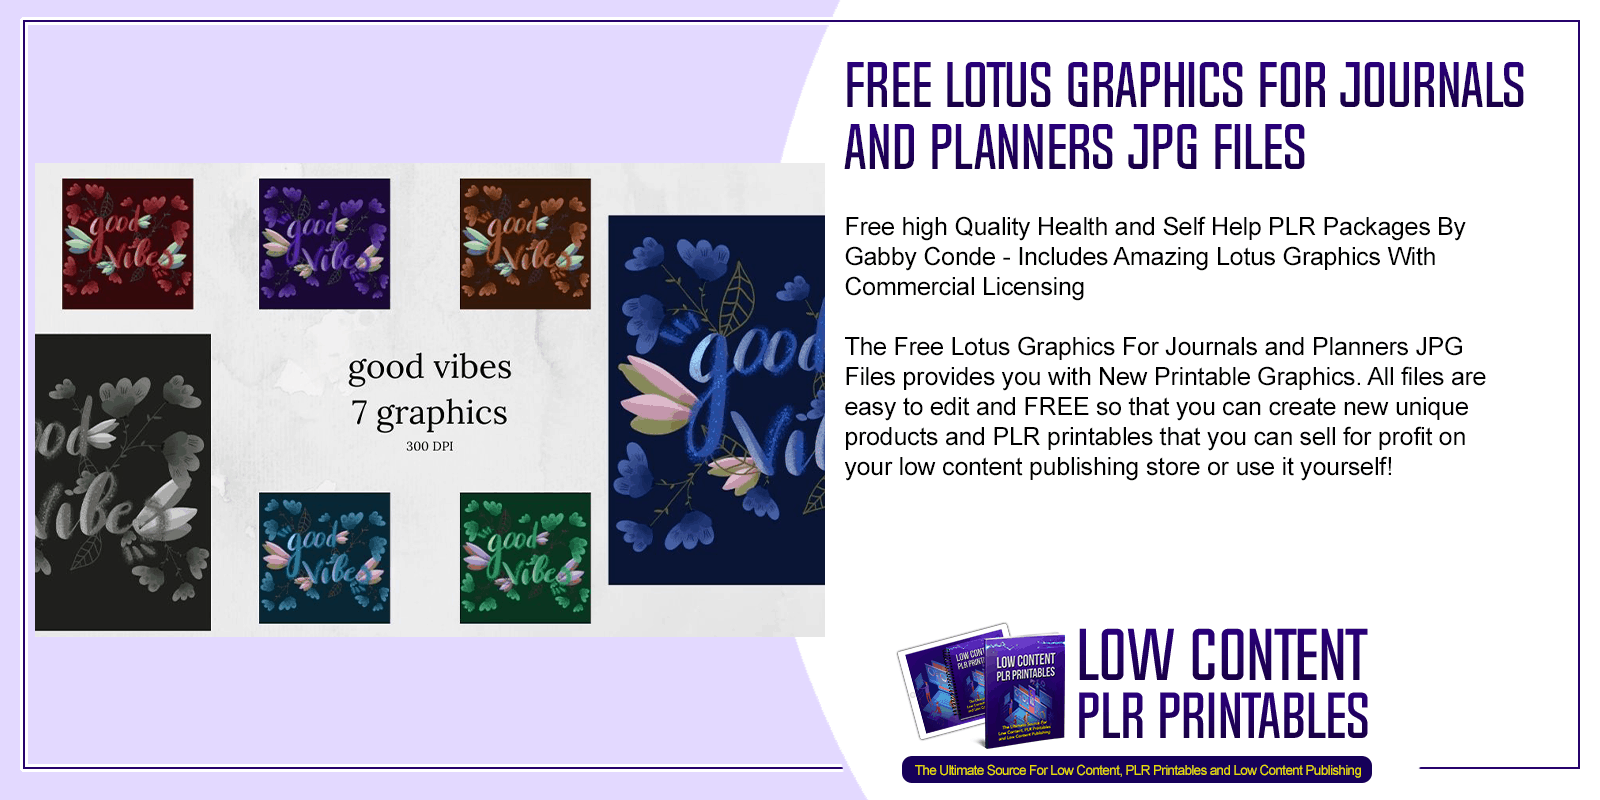 Free Lotus Graphics For Journals and Planners JPG Files